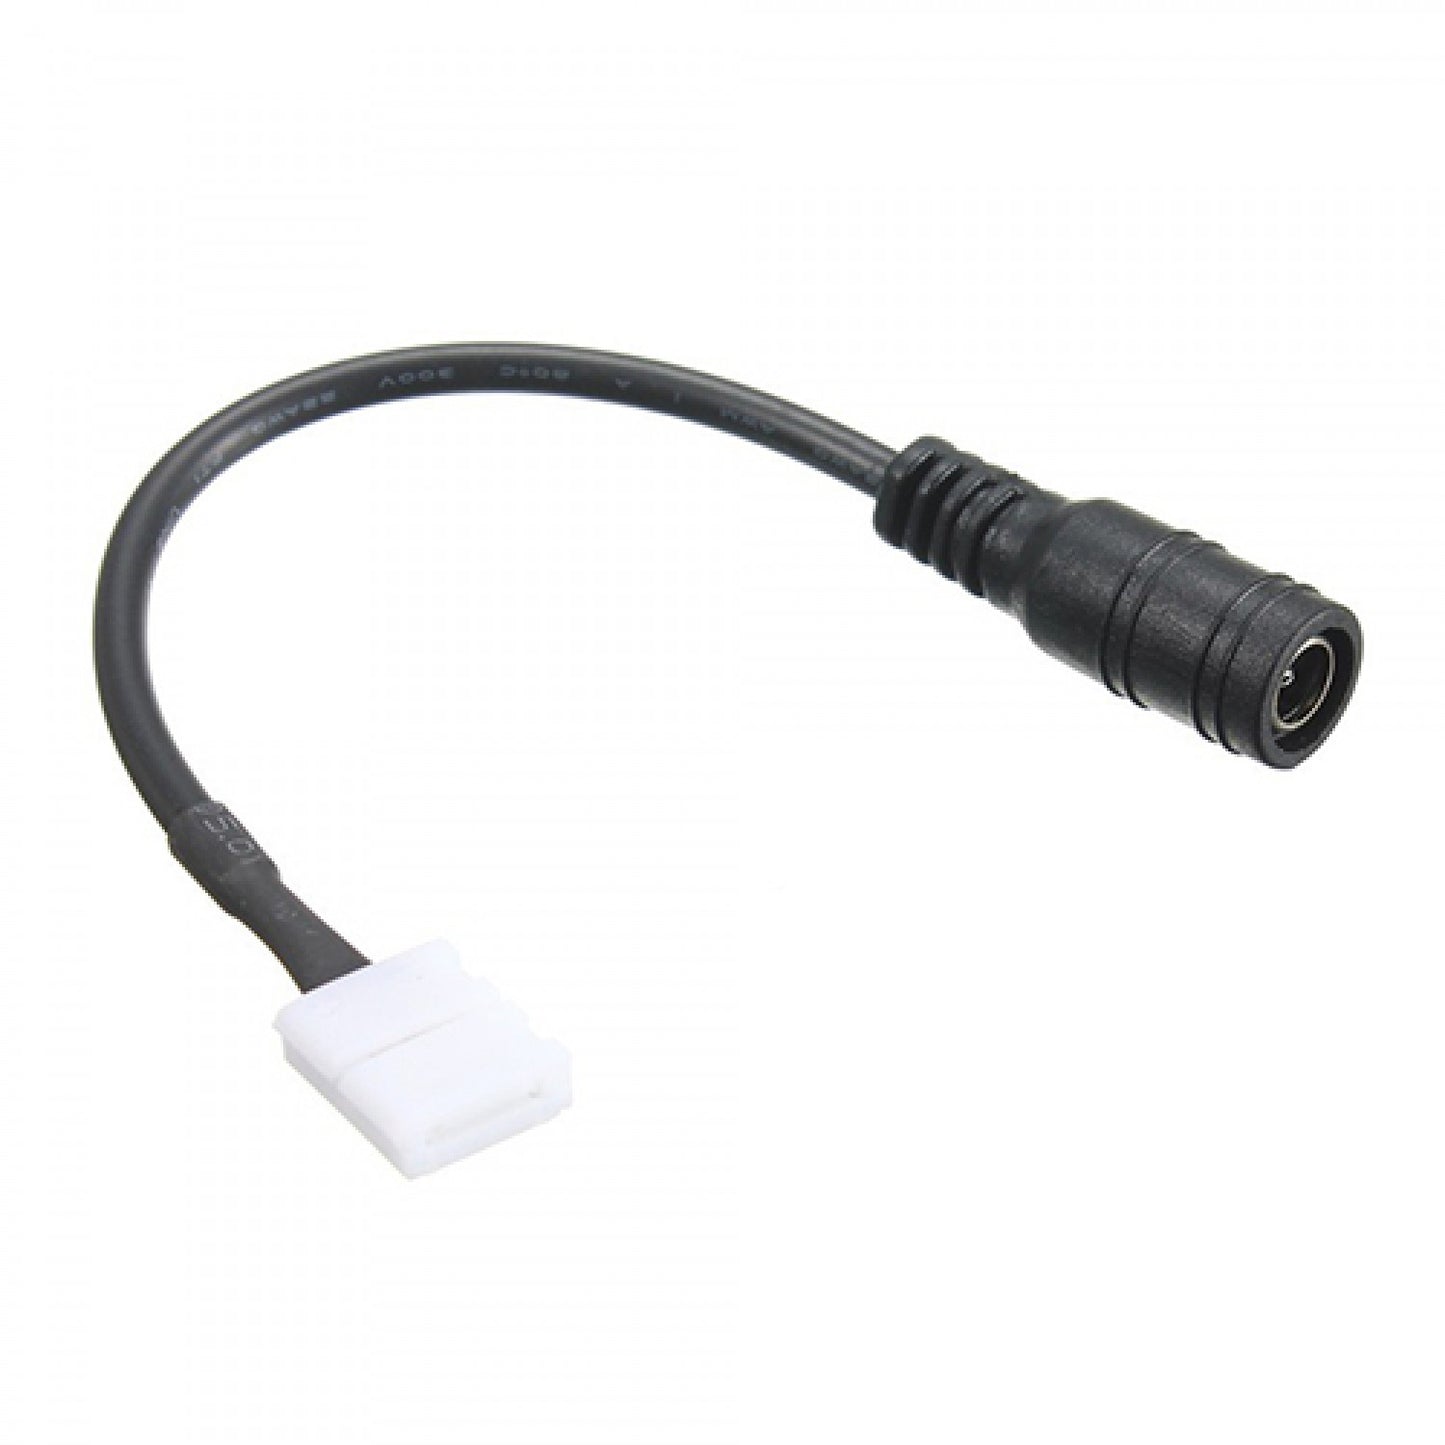 DC Barrel Connector to 10mm LED Strip